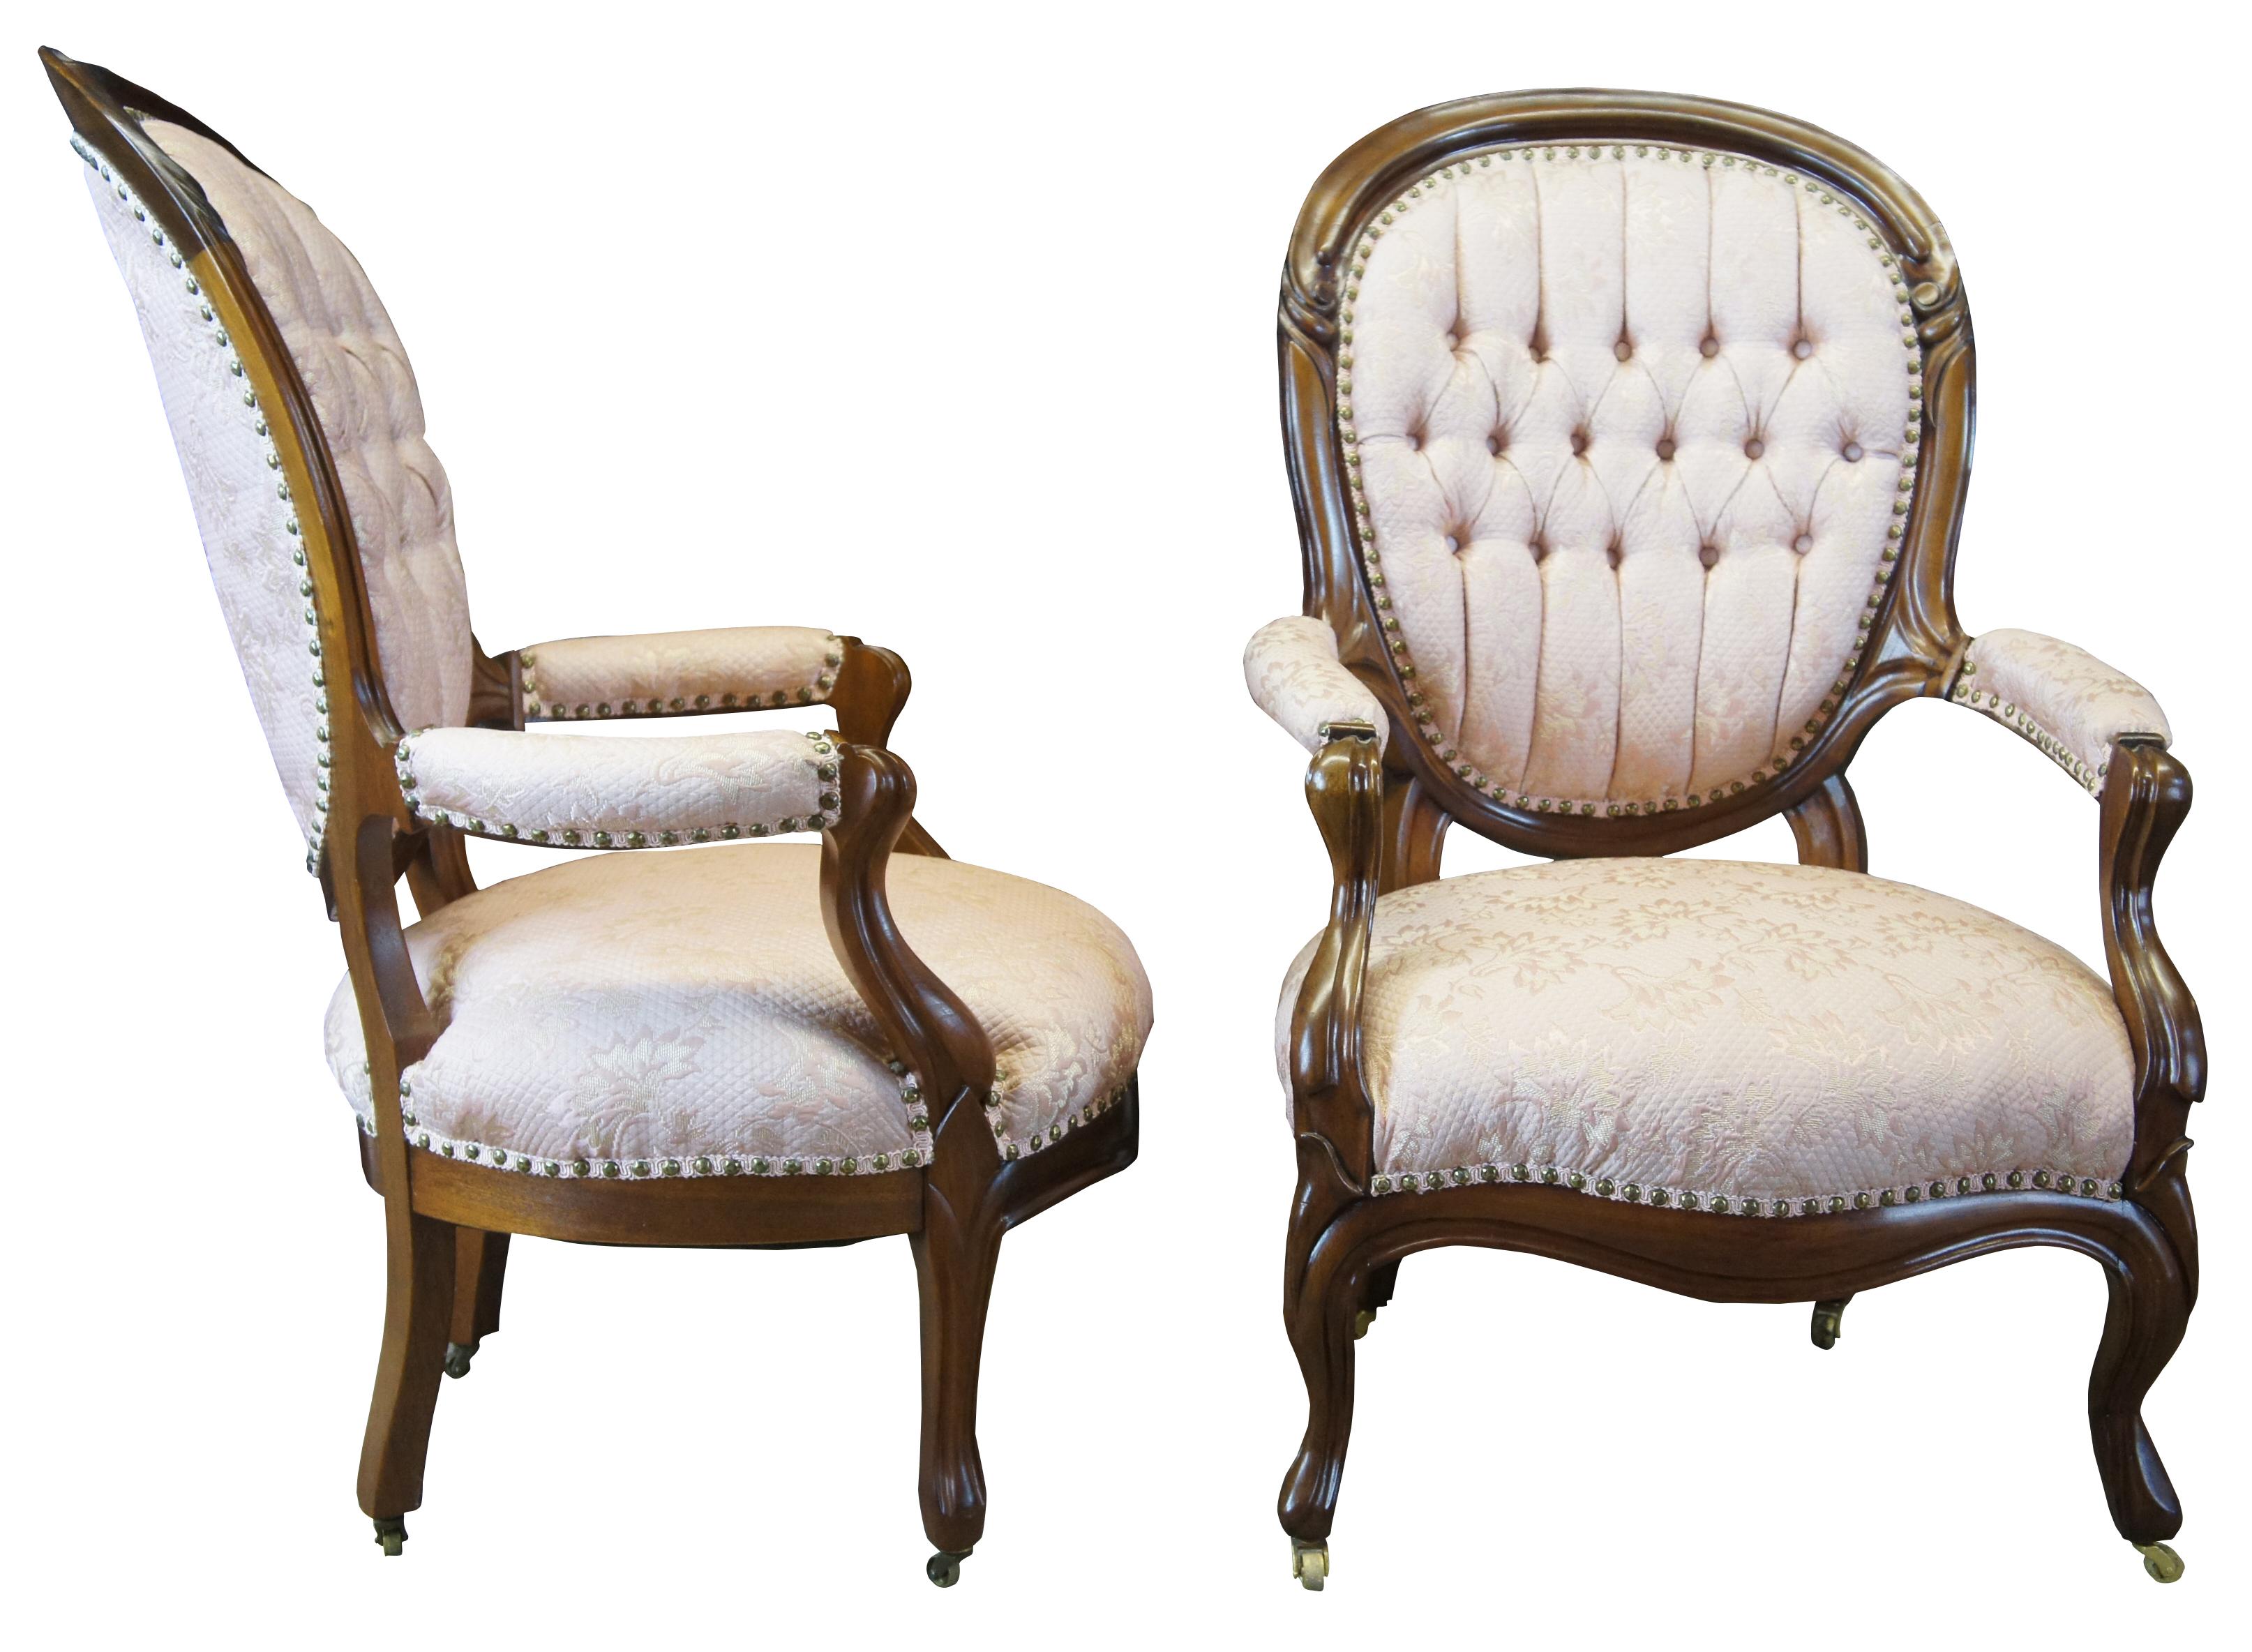 Pair of two antique Victorian his and hers parlor arm chairs. Made of walnut featuring serpentine form with blush pink floral upholstery, tufted balloon backs, padded arms, nailhead trim, and brass swivel castors.

Measures: his 26.5